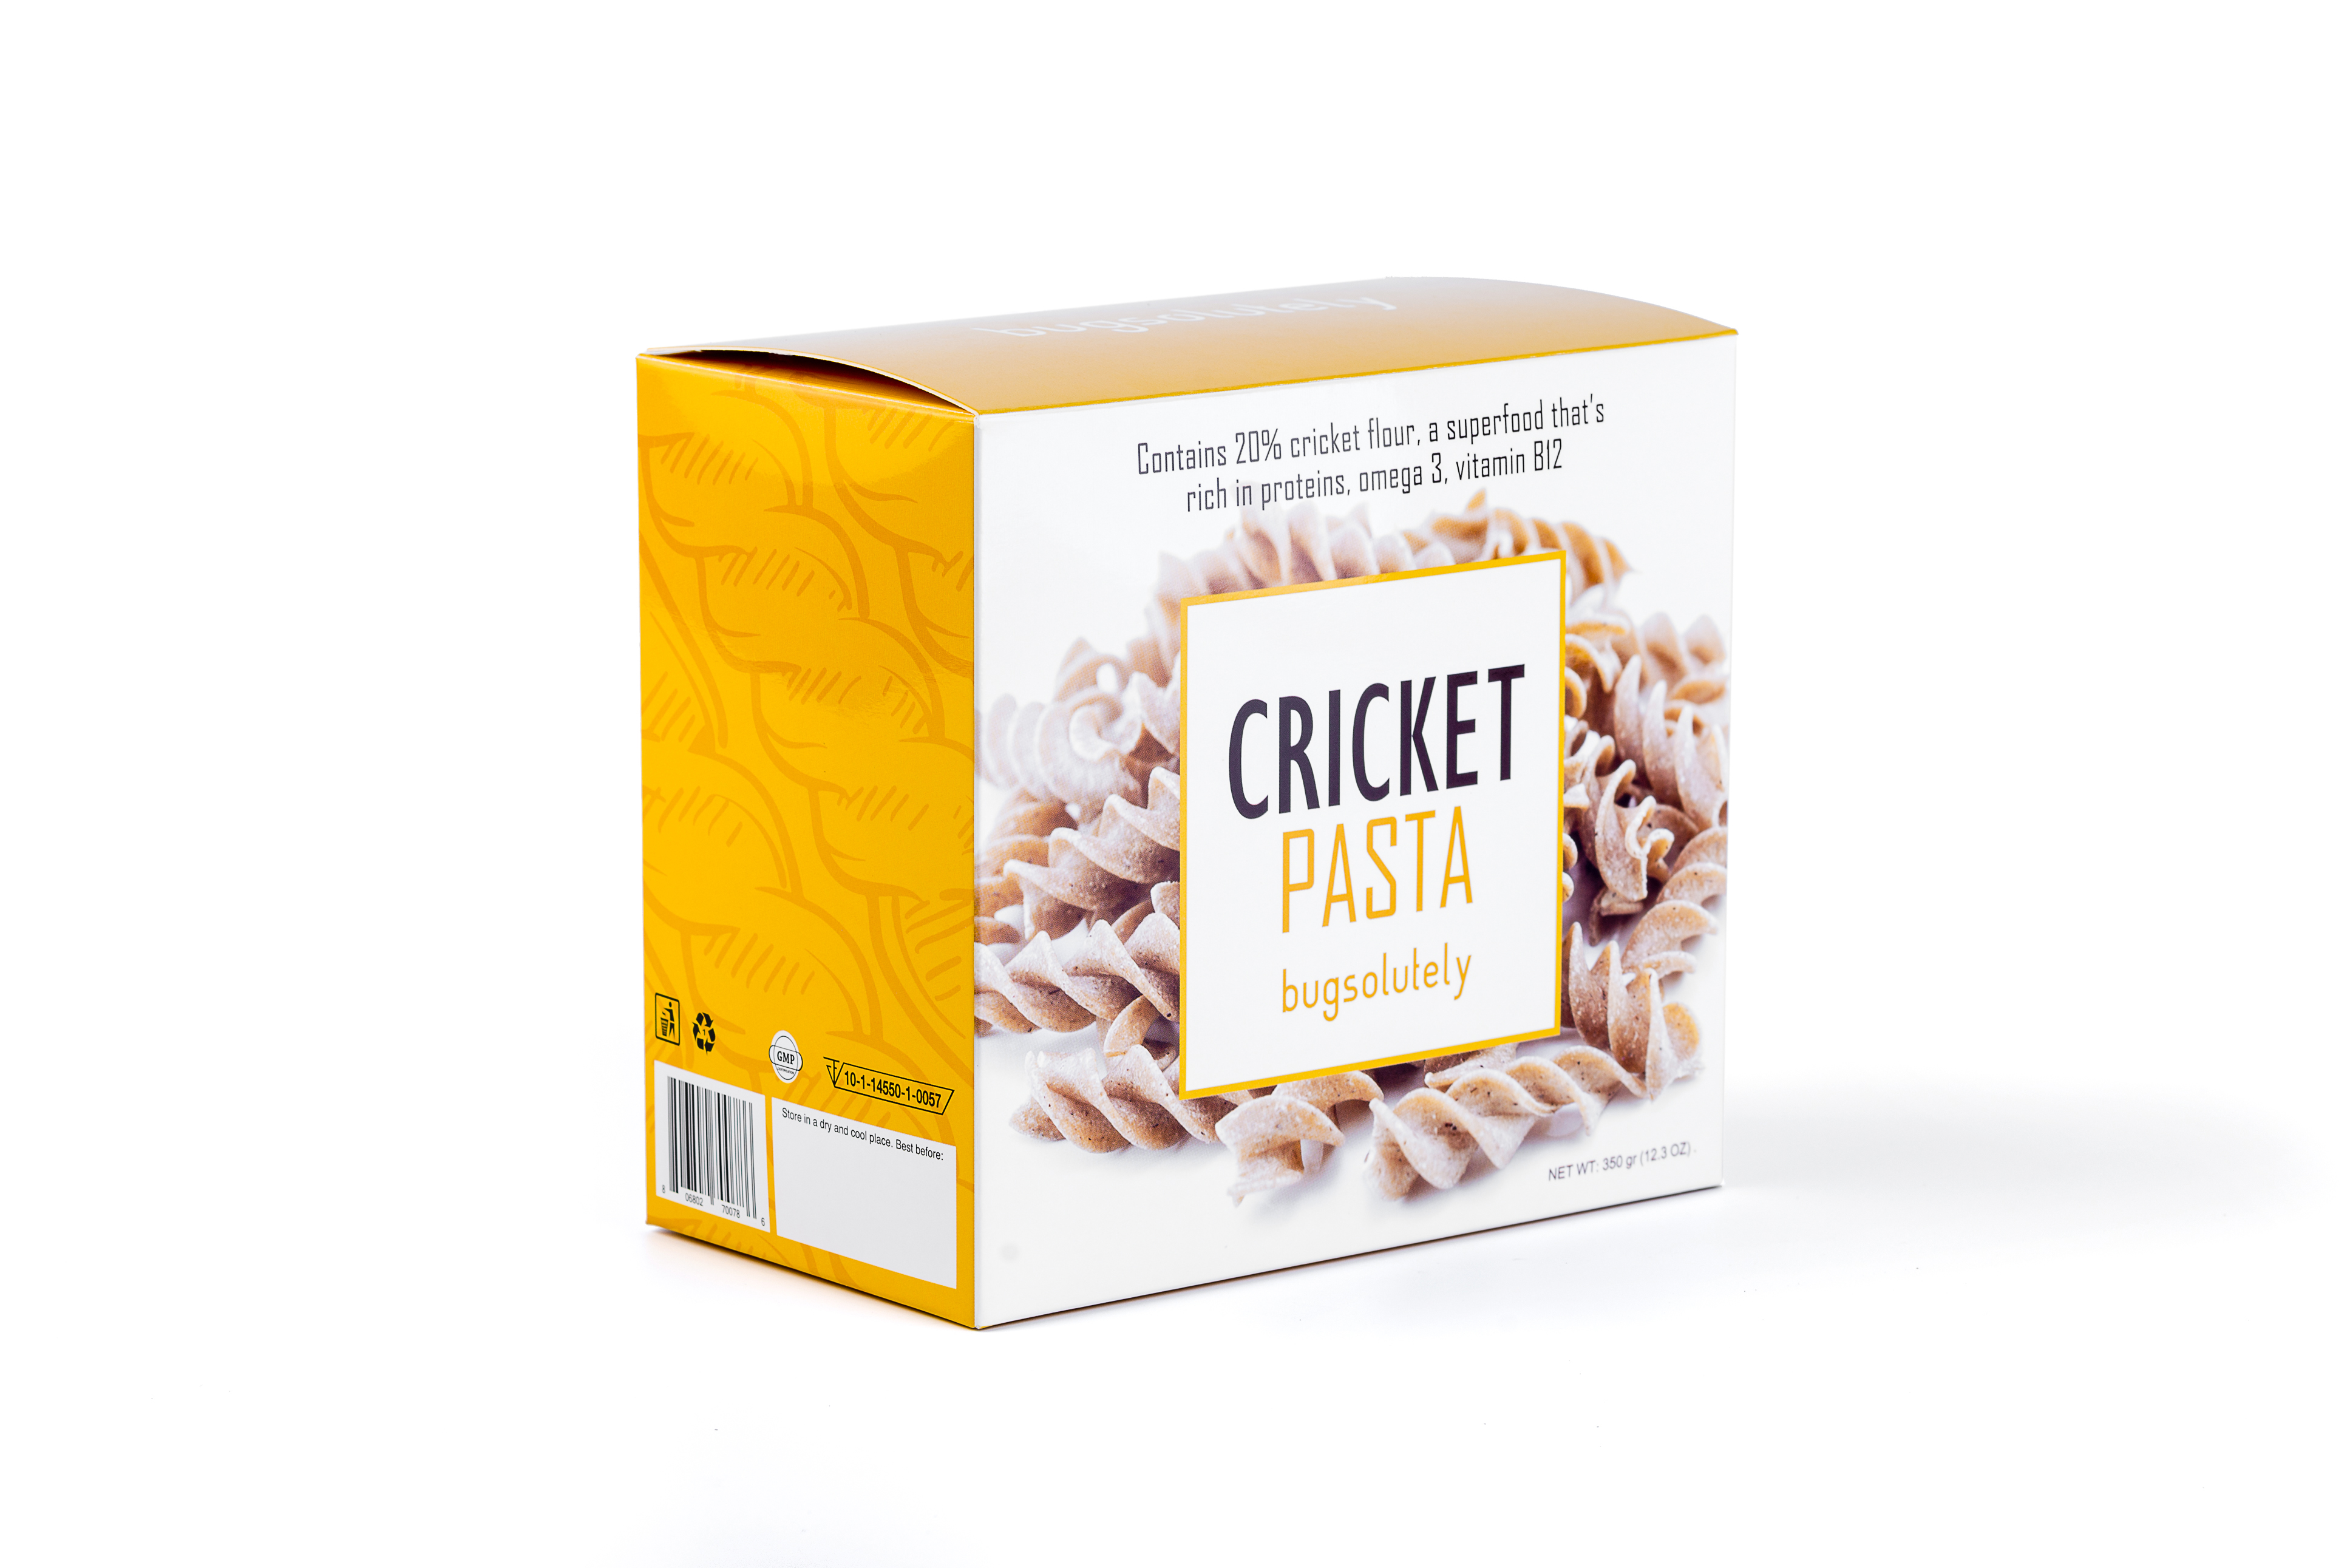 Cricket Pasta, explore the new world of edible insects'